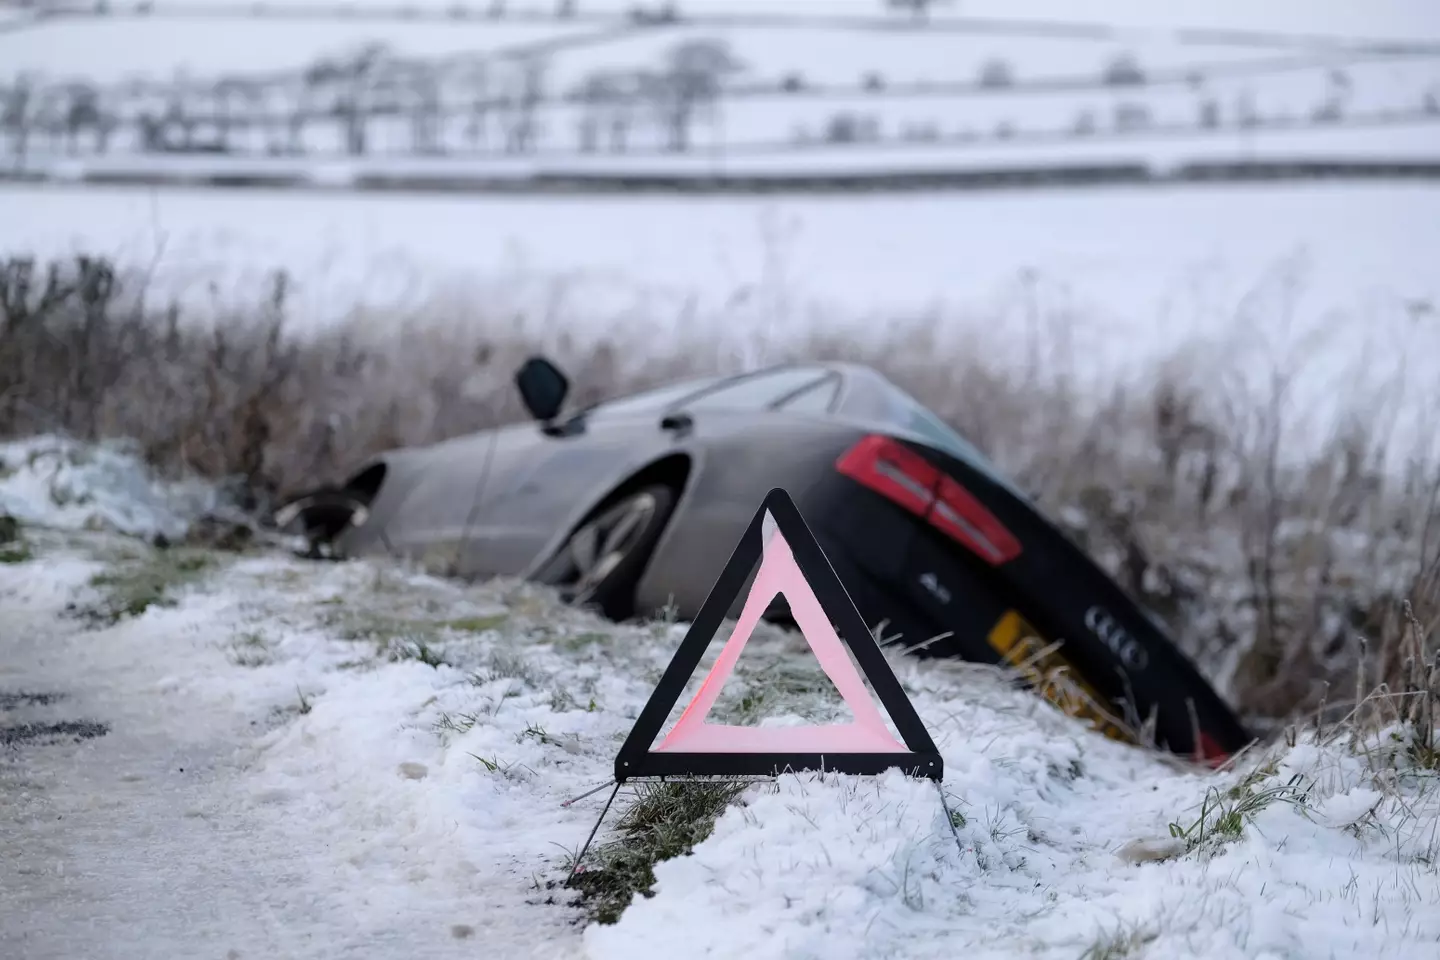 The weather is leading to very dangerous conditions on the UK's roads.